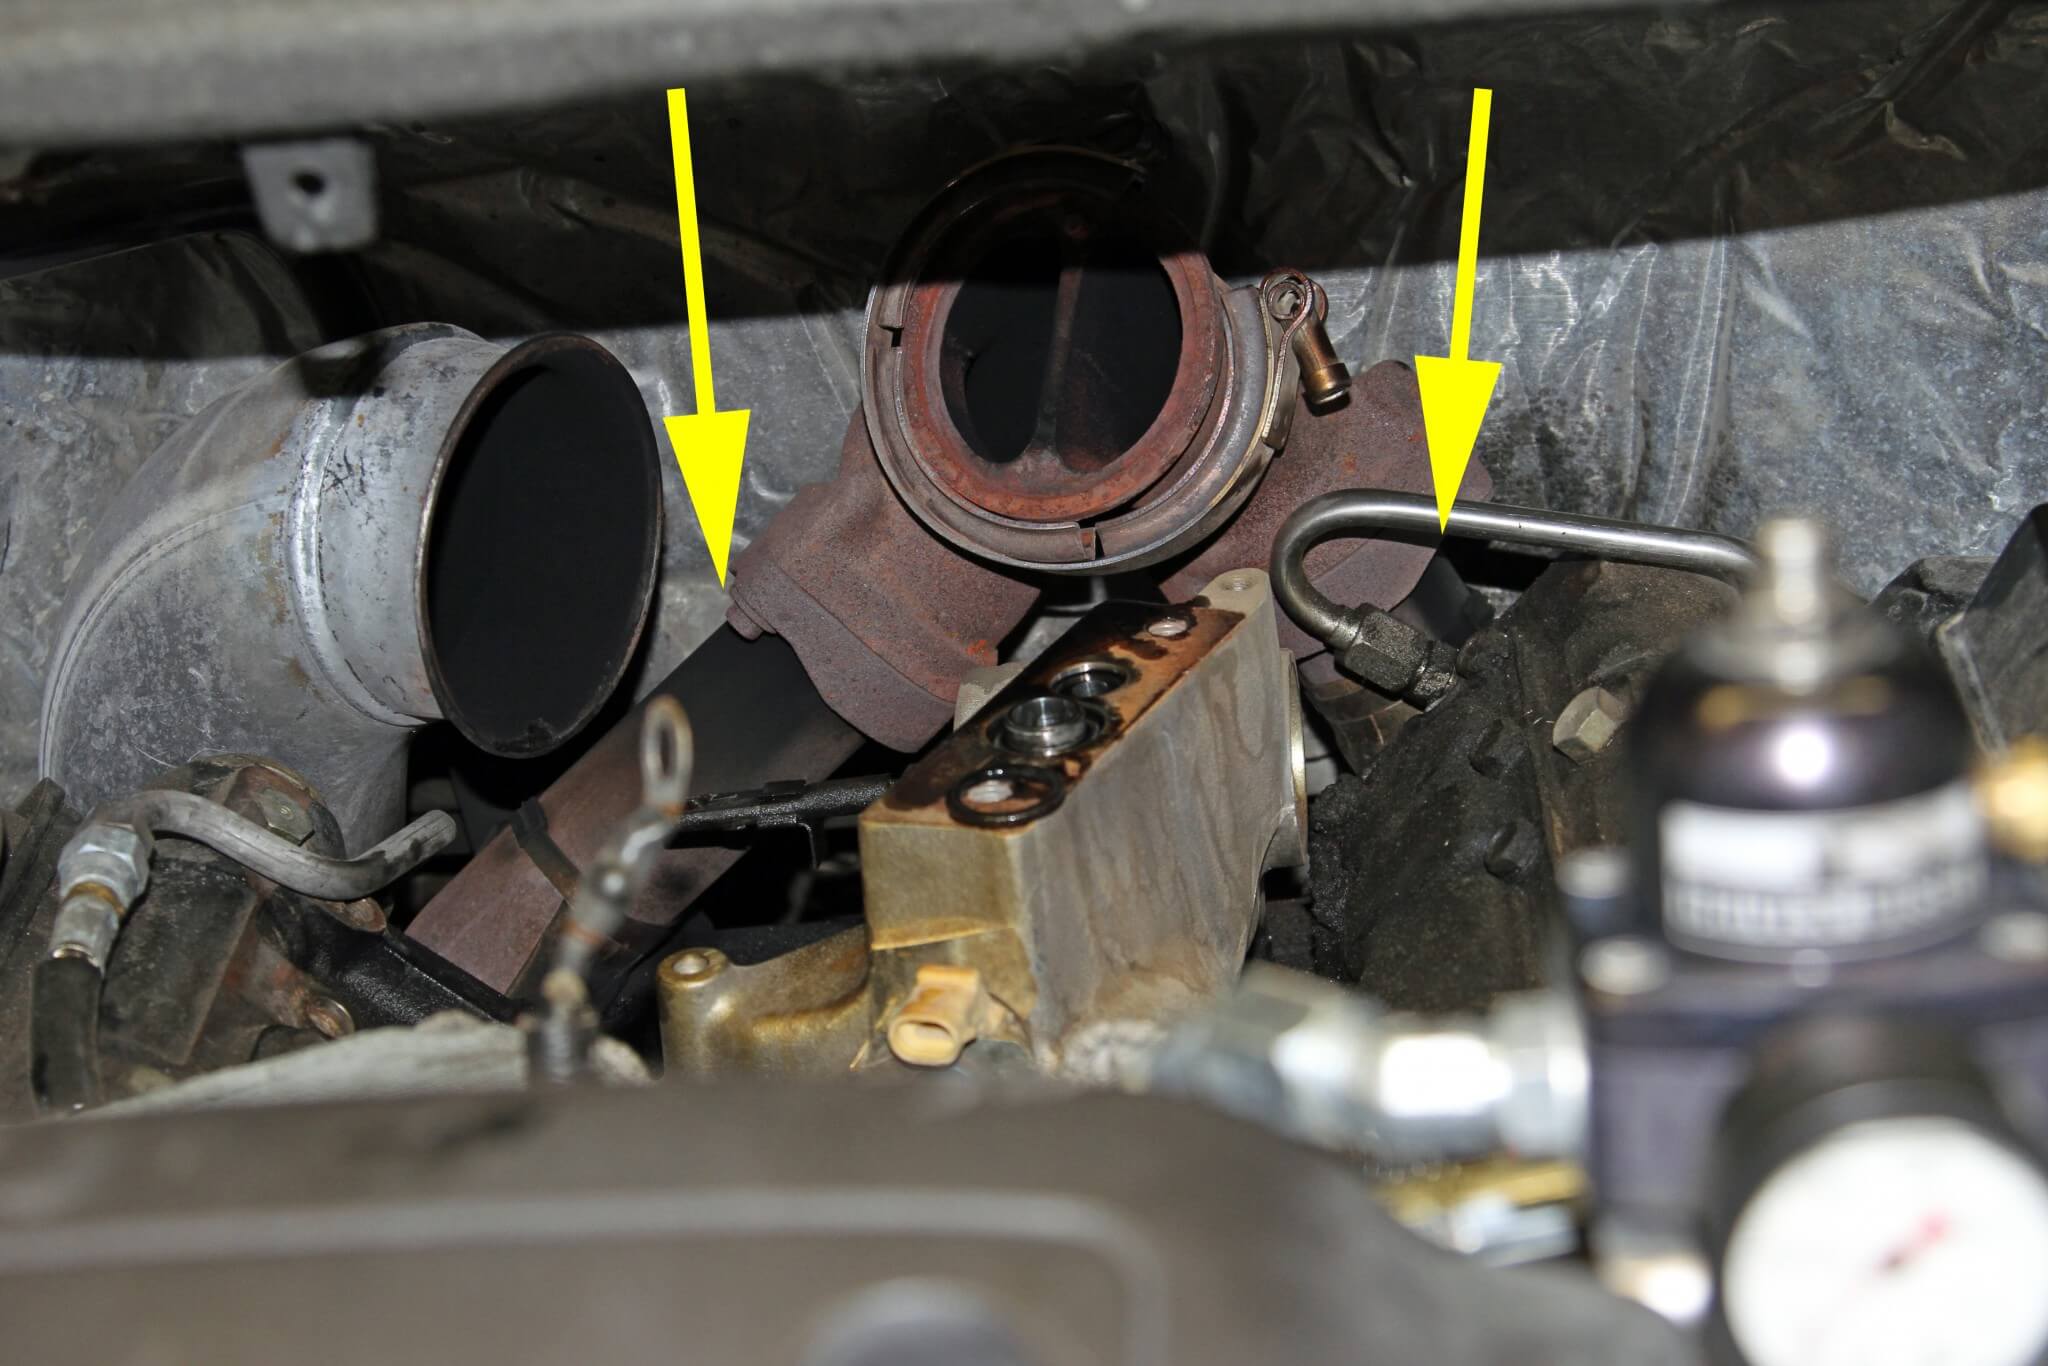 6. With the turbo out of the way you can see the up-pipes and collector. Soot stains on the up-pipes (see arrows) are evidence of severe exhaust leaks.